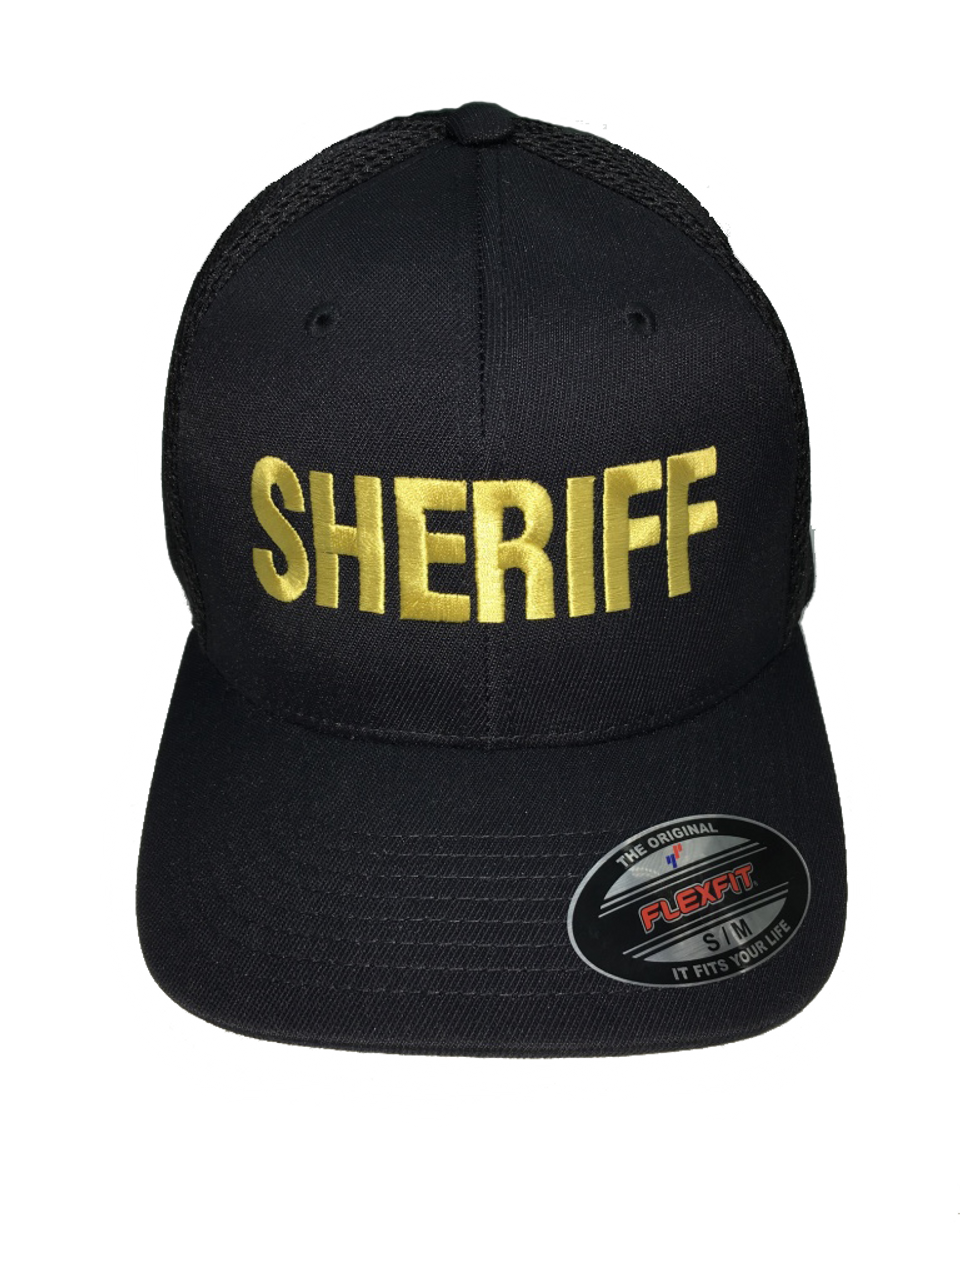 "Sheriff" Cap Front In Marine Gold Thread on Black 